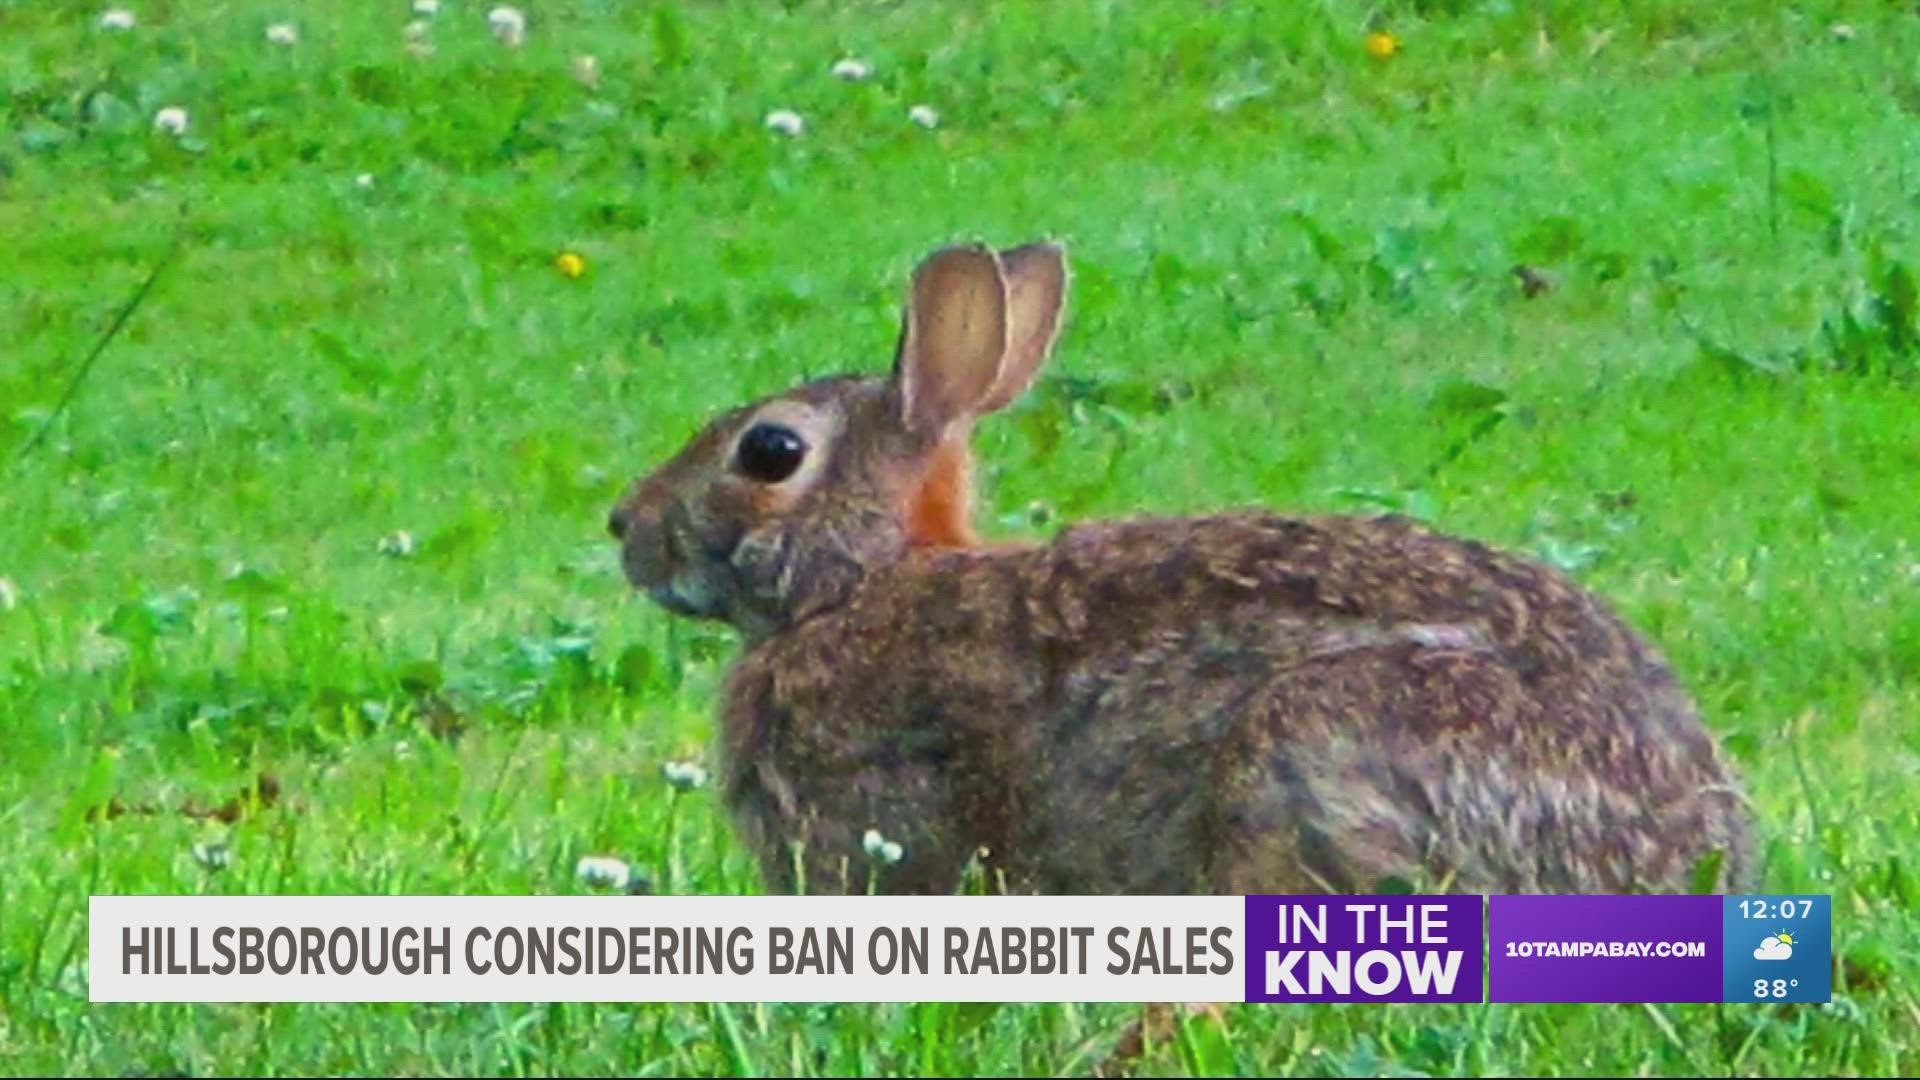 The county is concerned about the number of rabbits being surrendered.